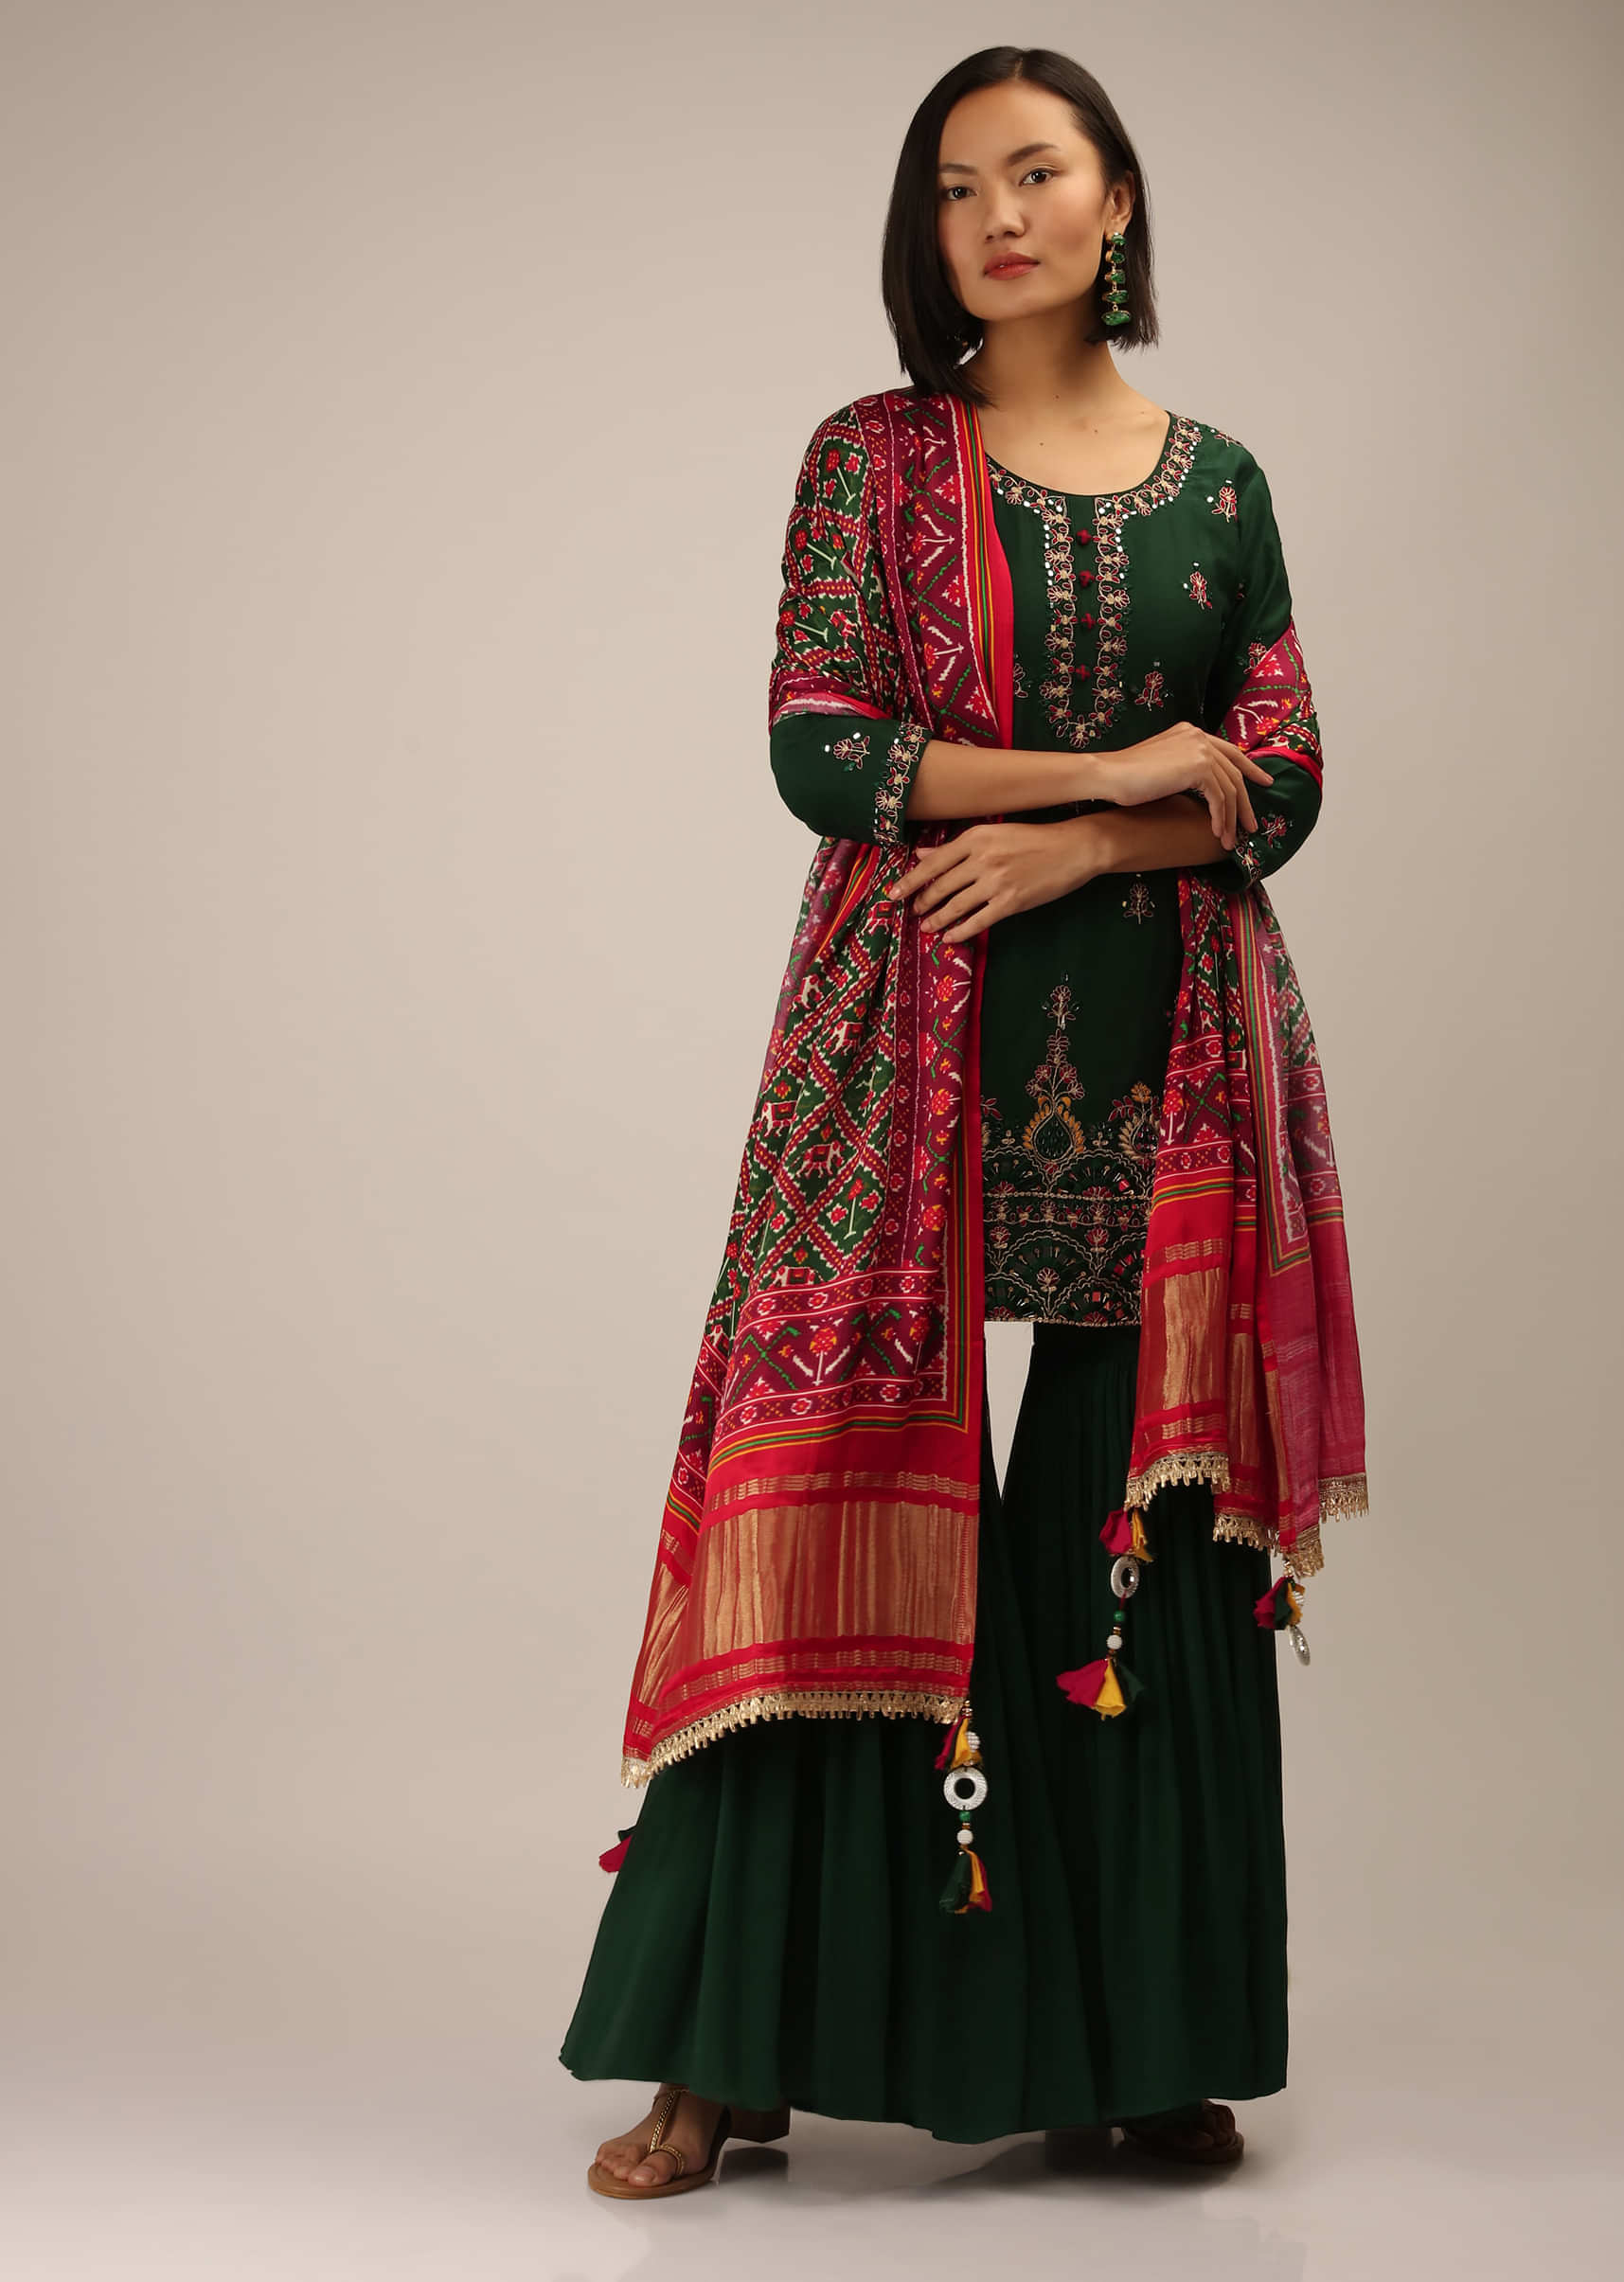 Buy Hunter Green Sharara Suit In Cotton Silk With Multi Colored Embroidery And Satin Patola Dupatta